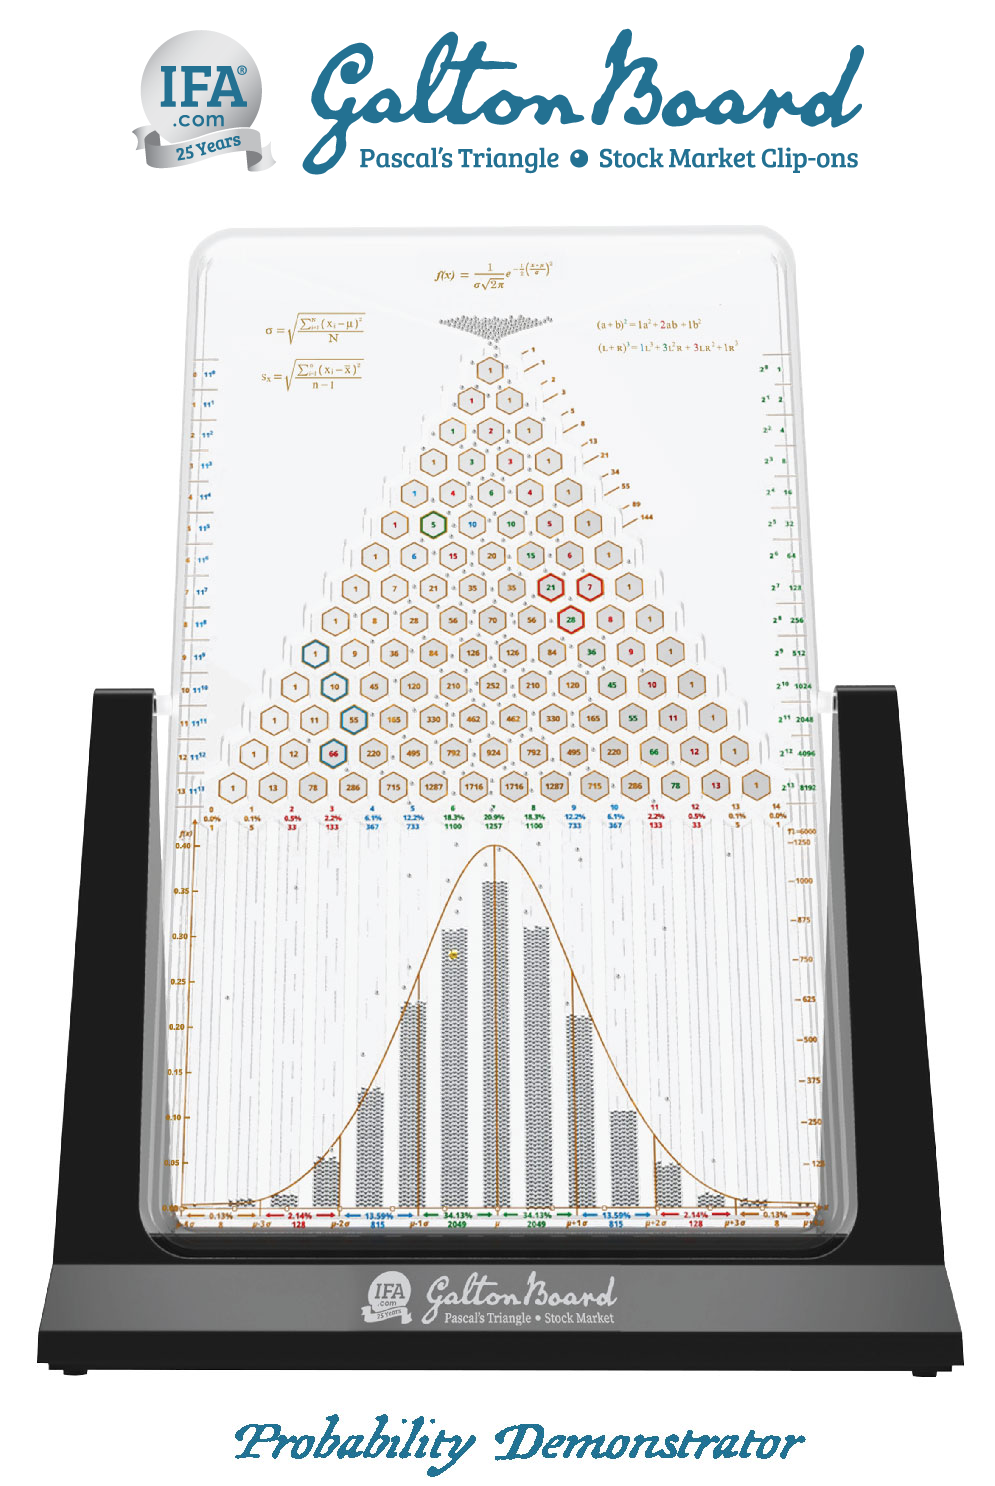 Galton Board with Pascals Triangle and Stock Market Clip-ons